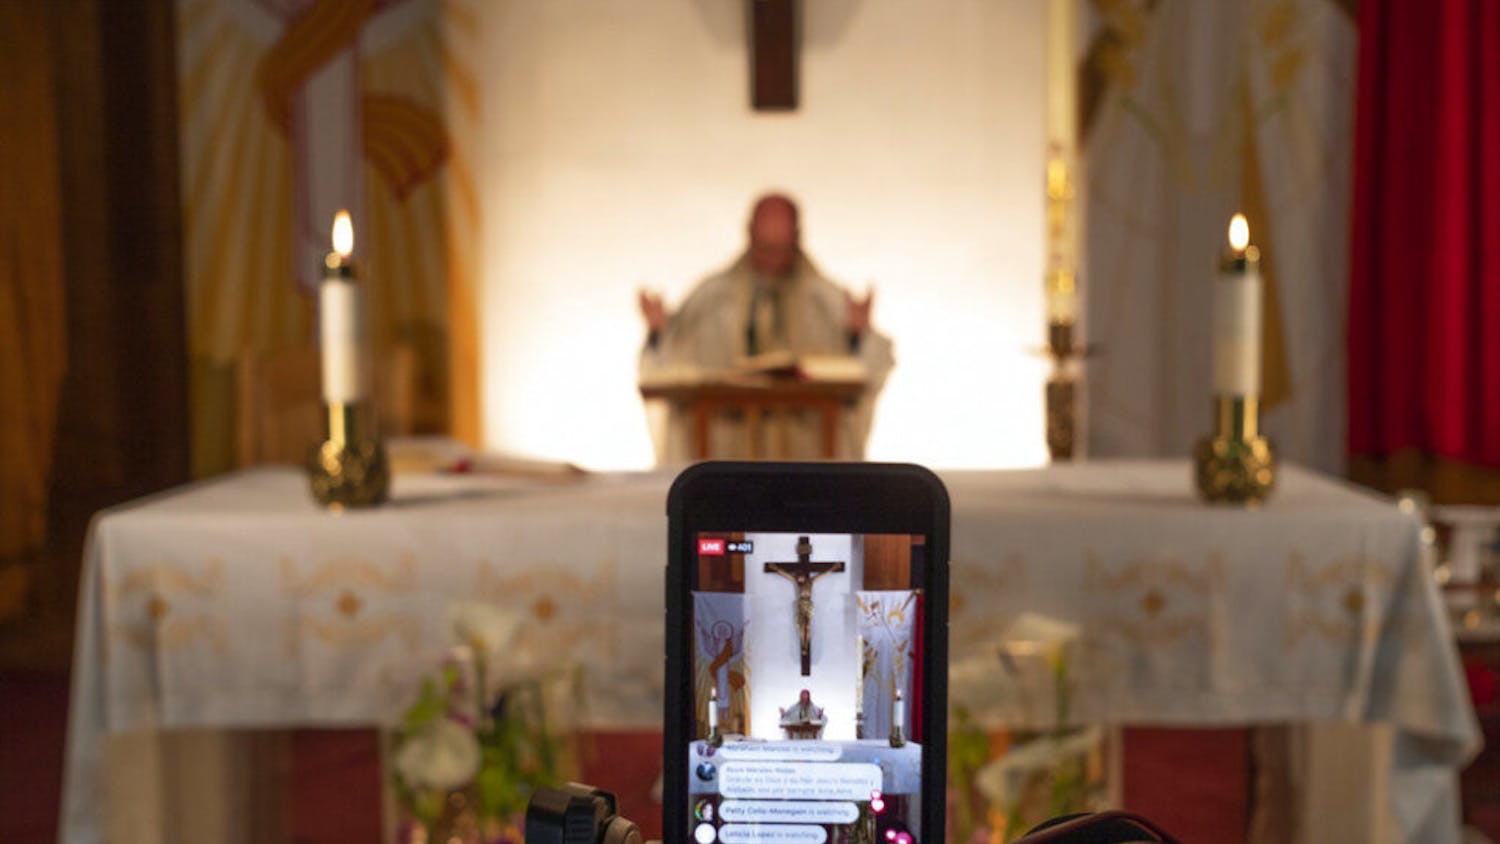 Pastor Nicolas Sanchez is seen on his iPhone used to live-stream in celebration of Easter Vigil Mass at St. Patrick Church in North Hollywood, Calif., on Saturday, April 11, 2020. The COVID-19 measures also have changed the way people worship, with churches and synagogues closed and many Passover and Easter services streamed online. (AP Photo/Damian Dovarganes)